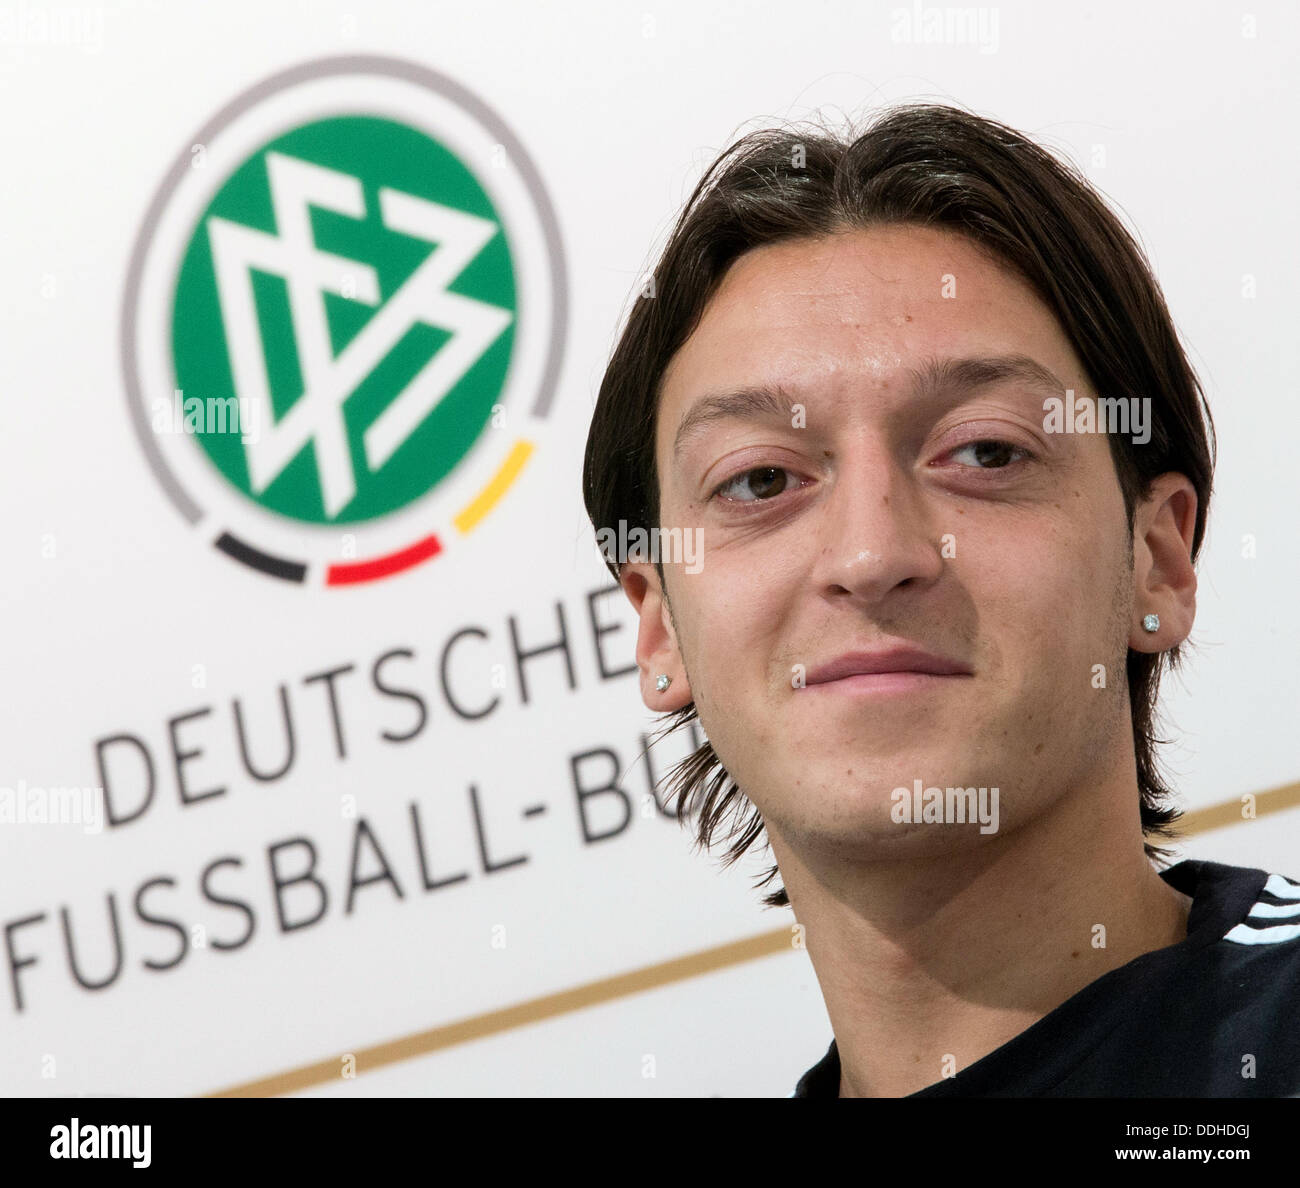 Germany's Mesut Oezil attends a press conference of the German national soccer team in Gdansk, Poland, 25 June 2012. The UEFA EURO 2012 takes place from 08 June to 01 July 2012 and is co-hosted by Poland and Ukraine. Photo: Jens Wolf dpa  +++(c) dpa - Bildfunk+++ Stock Photo